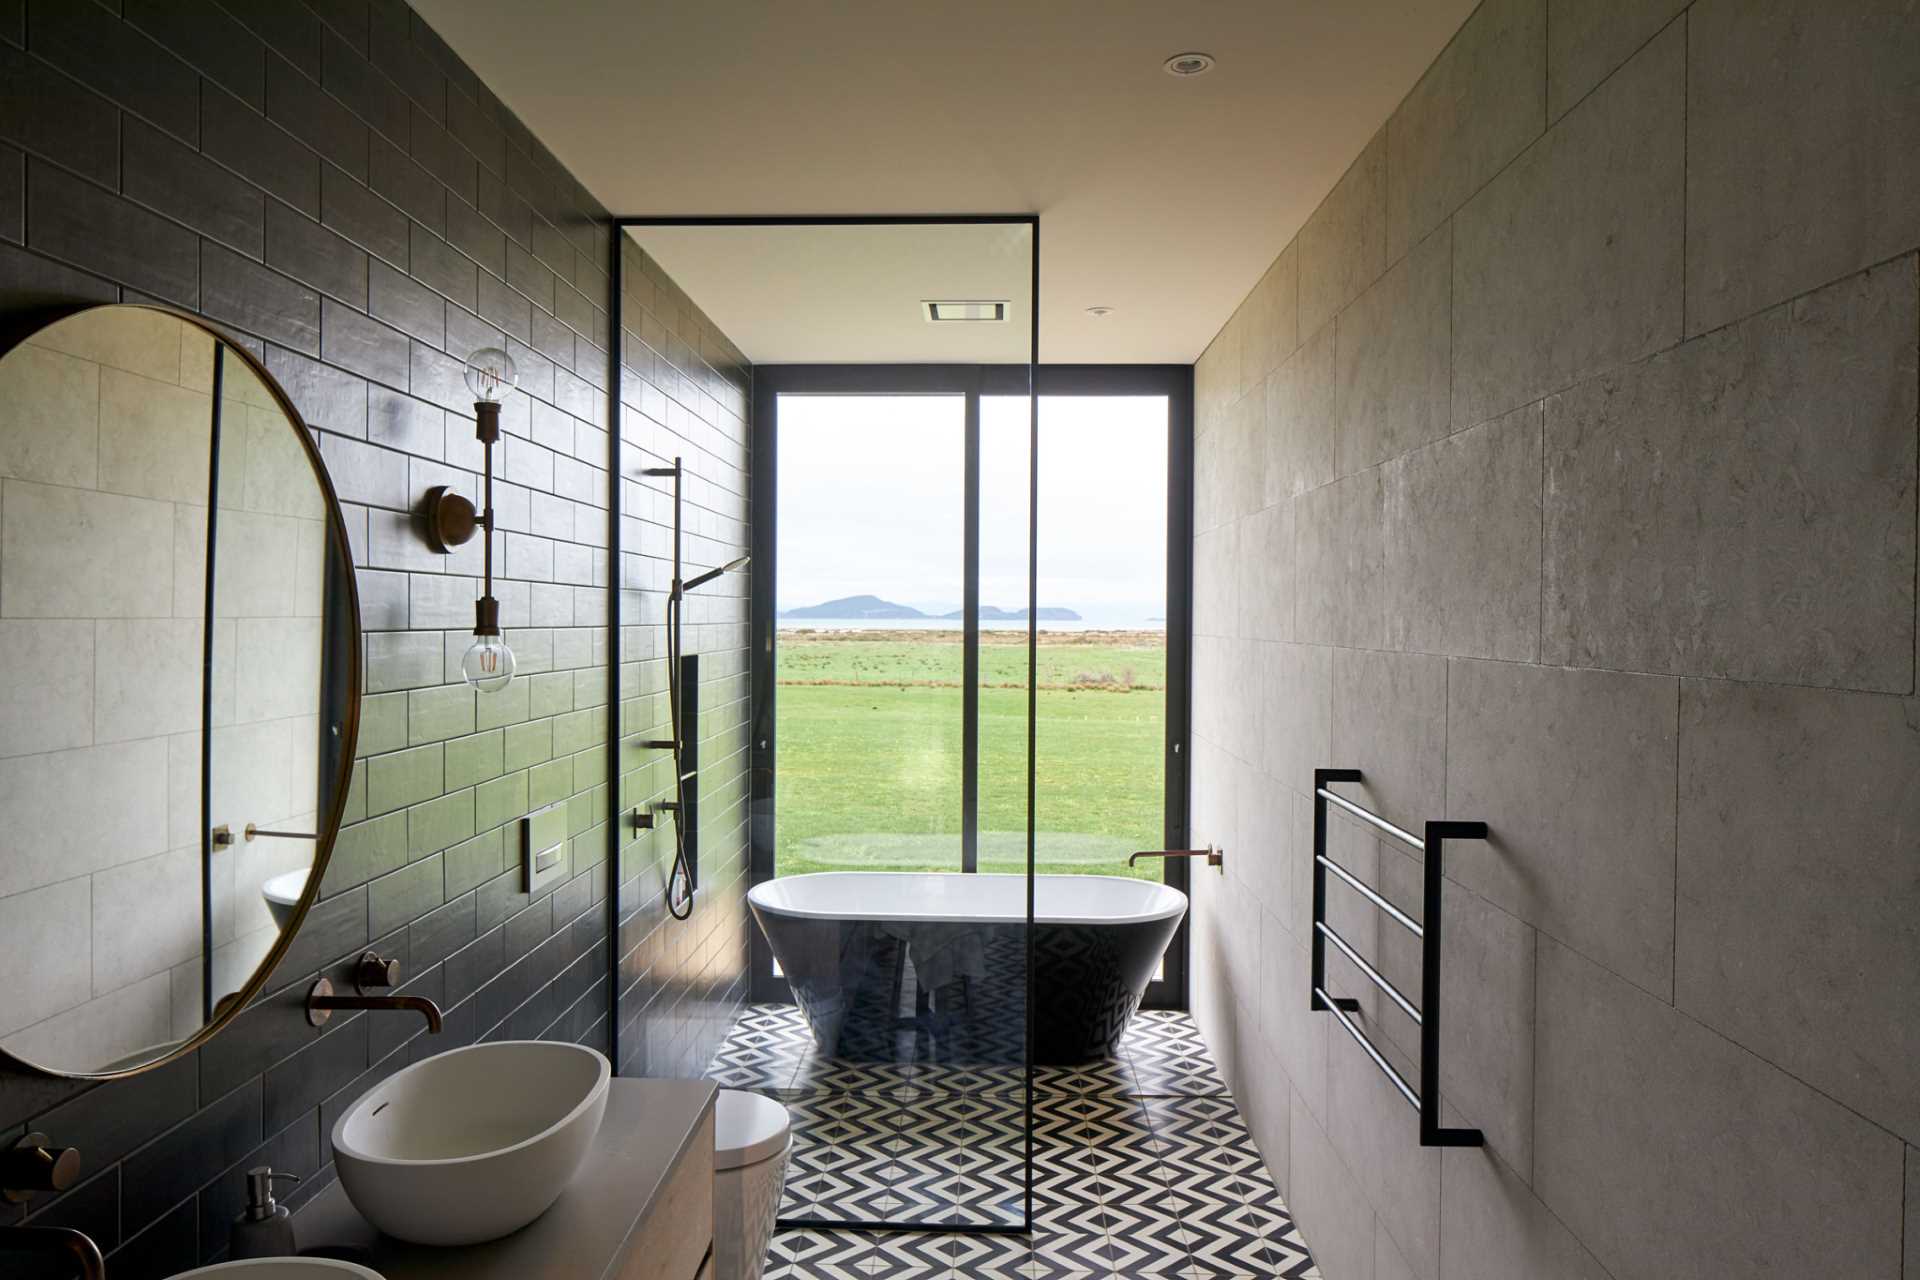 In this modern bathroom, black subway tiles line the wall, while graphic black and white tiles are featured on the floor. A floating wood vanity adds a natural element, and the freestanding bathtub is positioned in front of the floor-to-ceiling window.